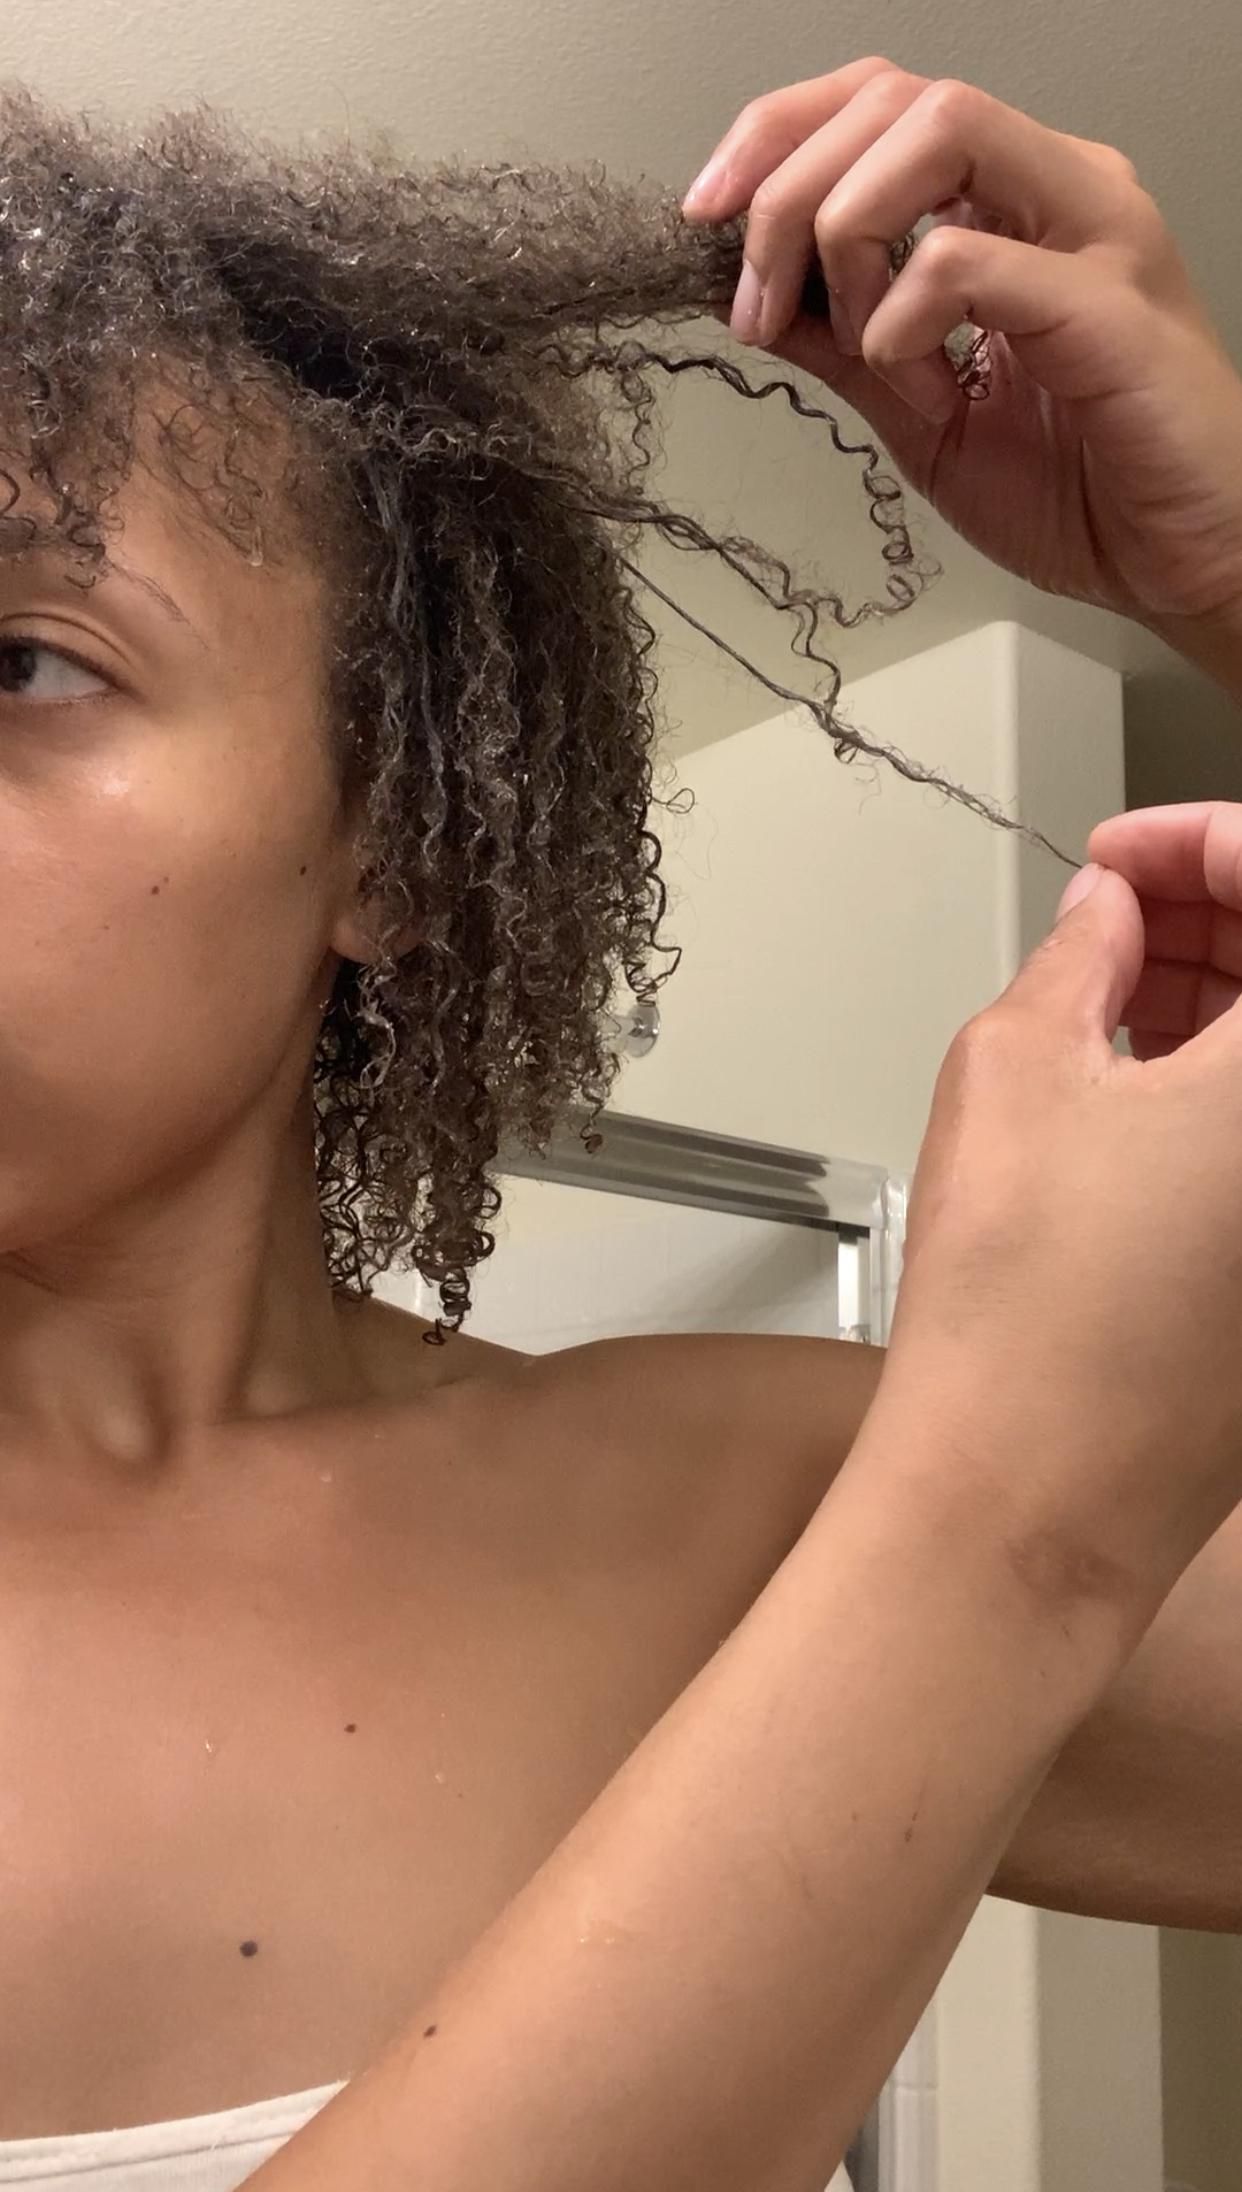 Products Review On Natural Hair - Lifestyle, Culture, Love, Wellness